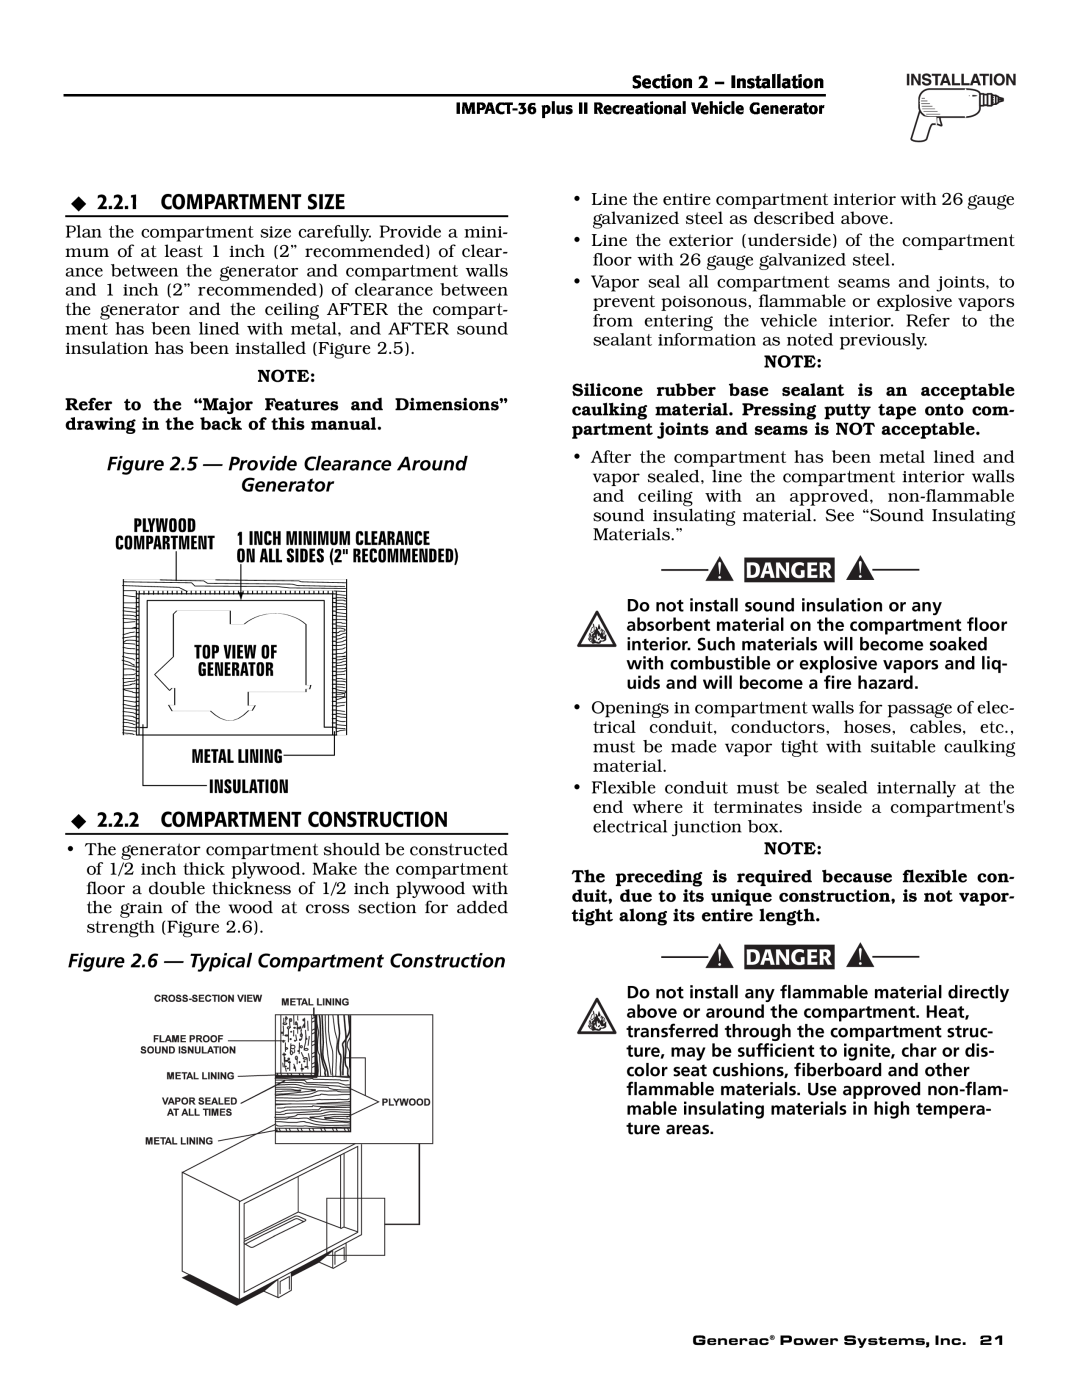 Generac 00941-3 owner manual Compartment Size, Compartment Construction, Danger, 5 - Provide Clearance Around Generator 